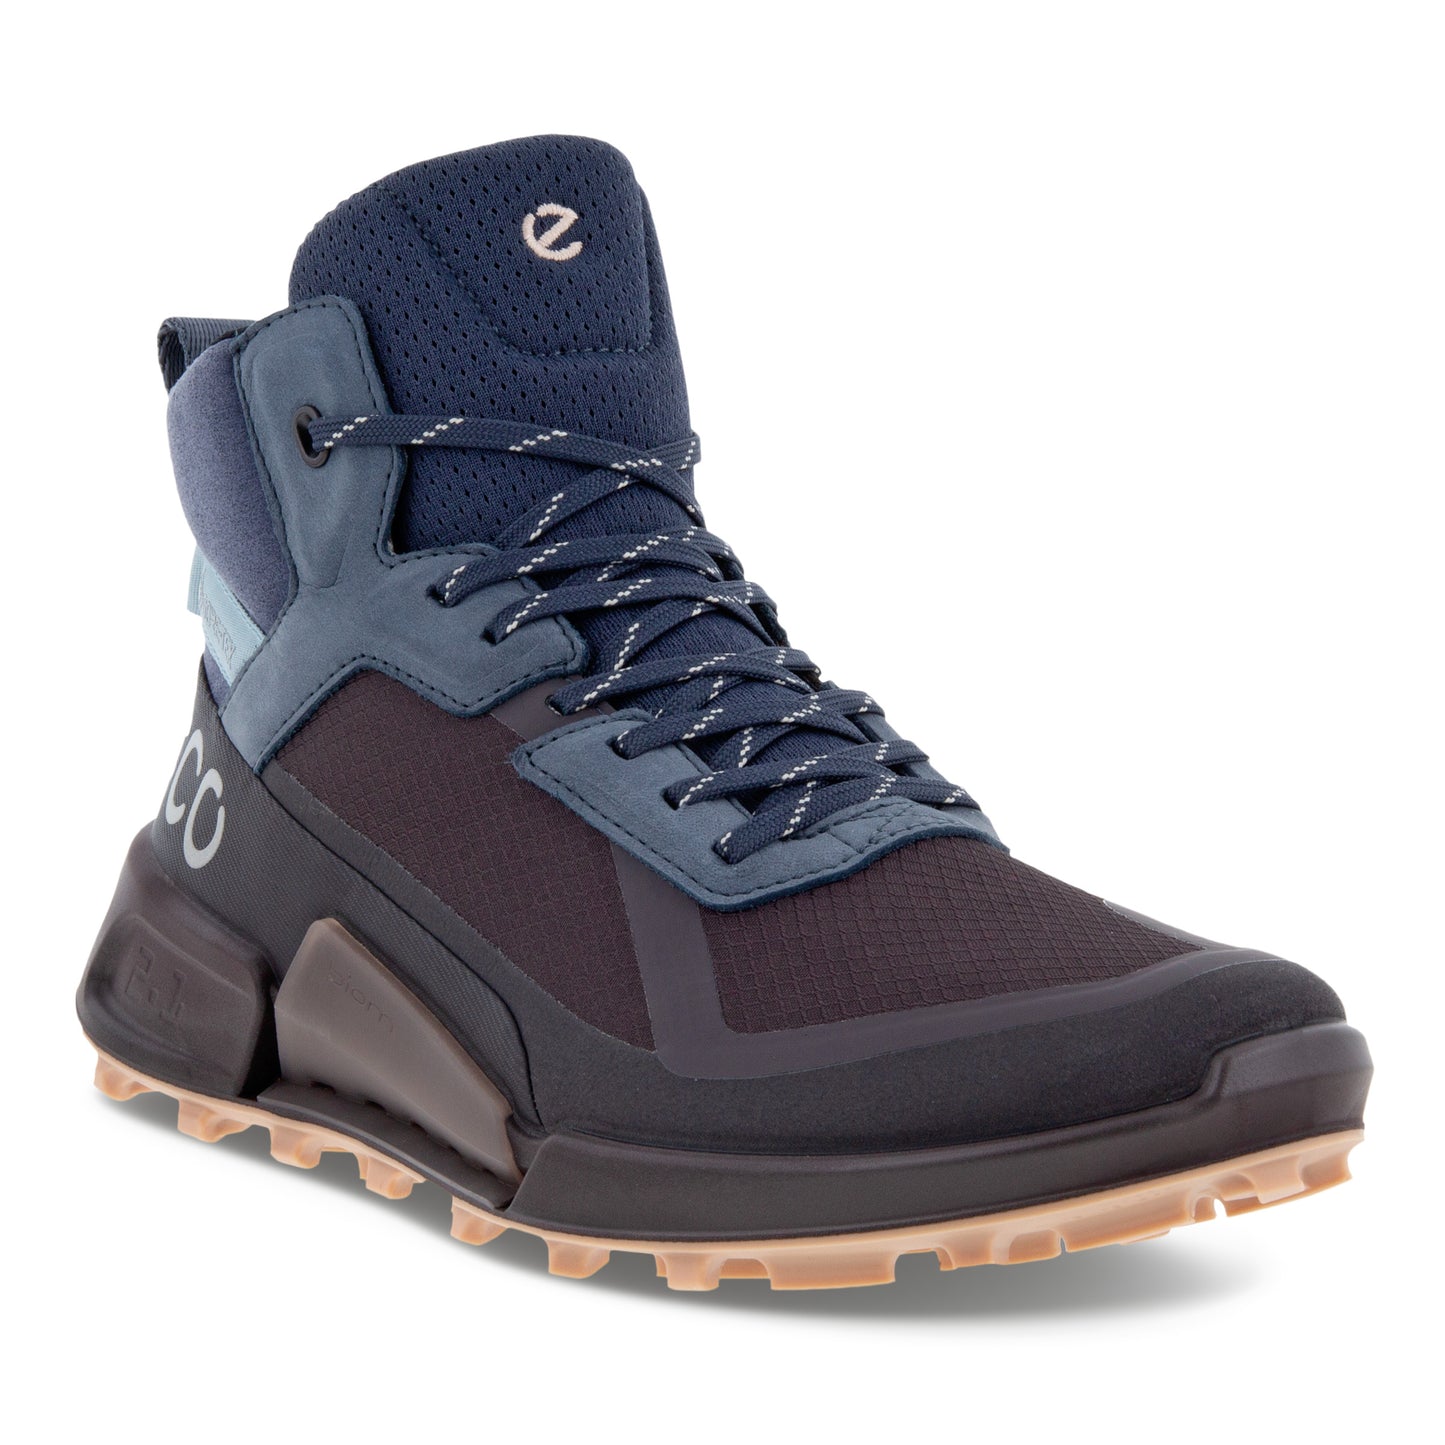 Ecco 823803 52169 Biom 2.1 X Mountain Shale/Ombre Navy & Brown Combi Boots